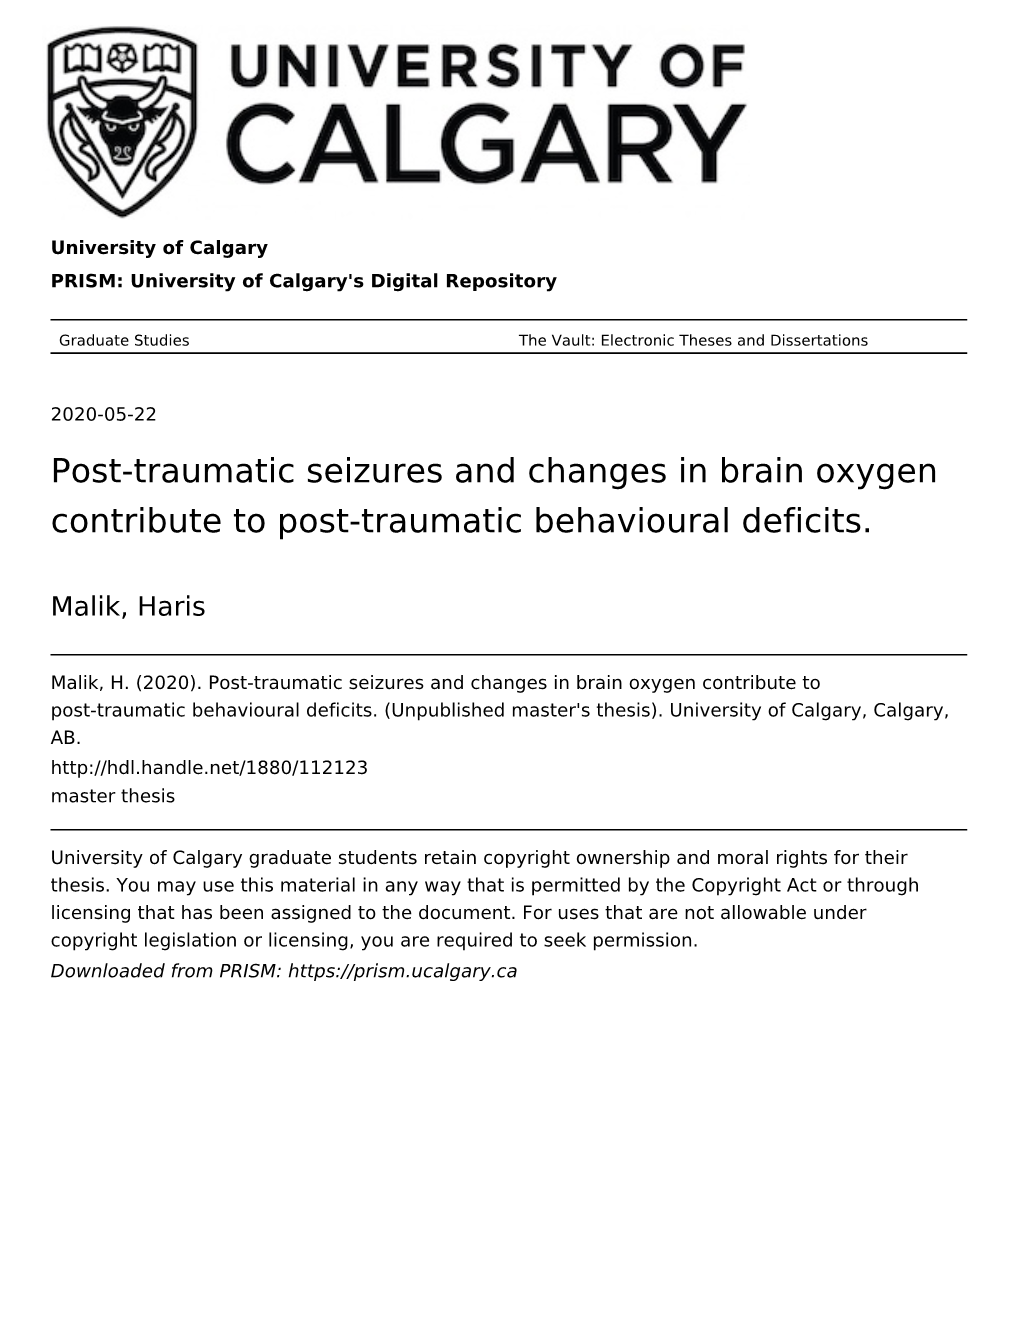 Post-Traumatic Seizures and Changes in Brain Oxygen Contribute to Post-Traumatic Behavioural Deficits